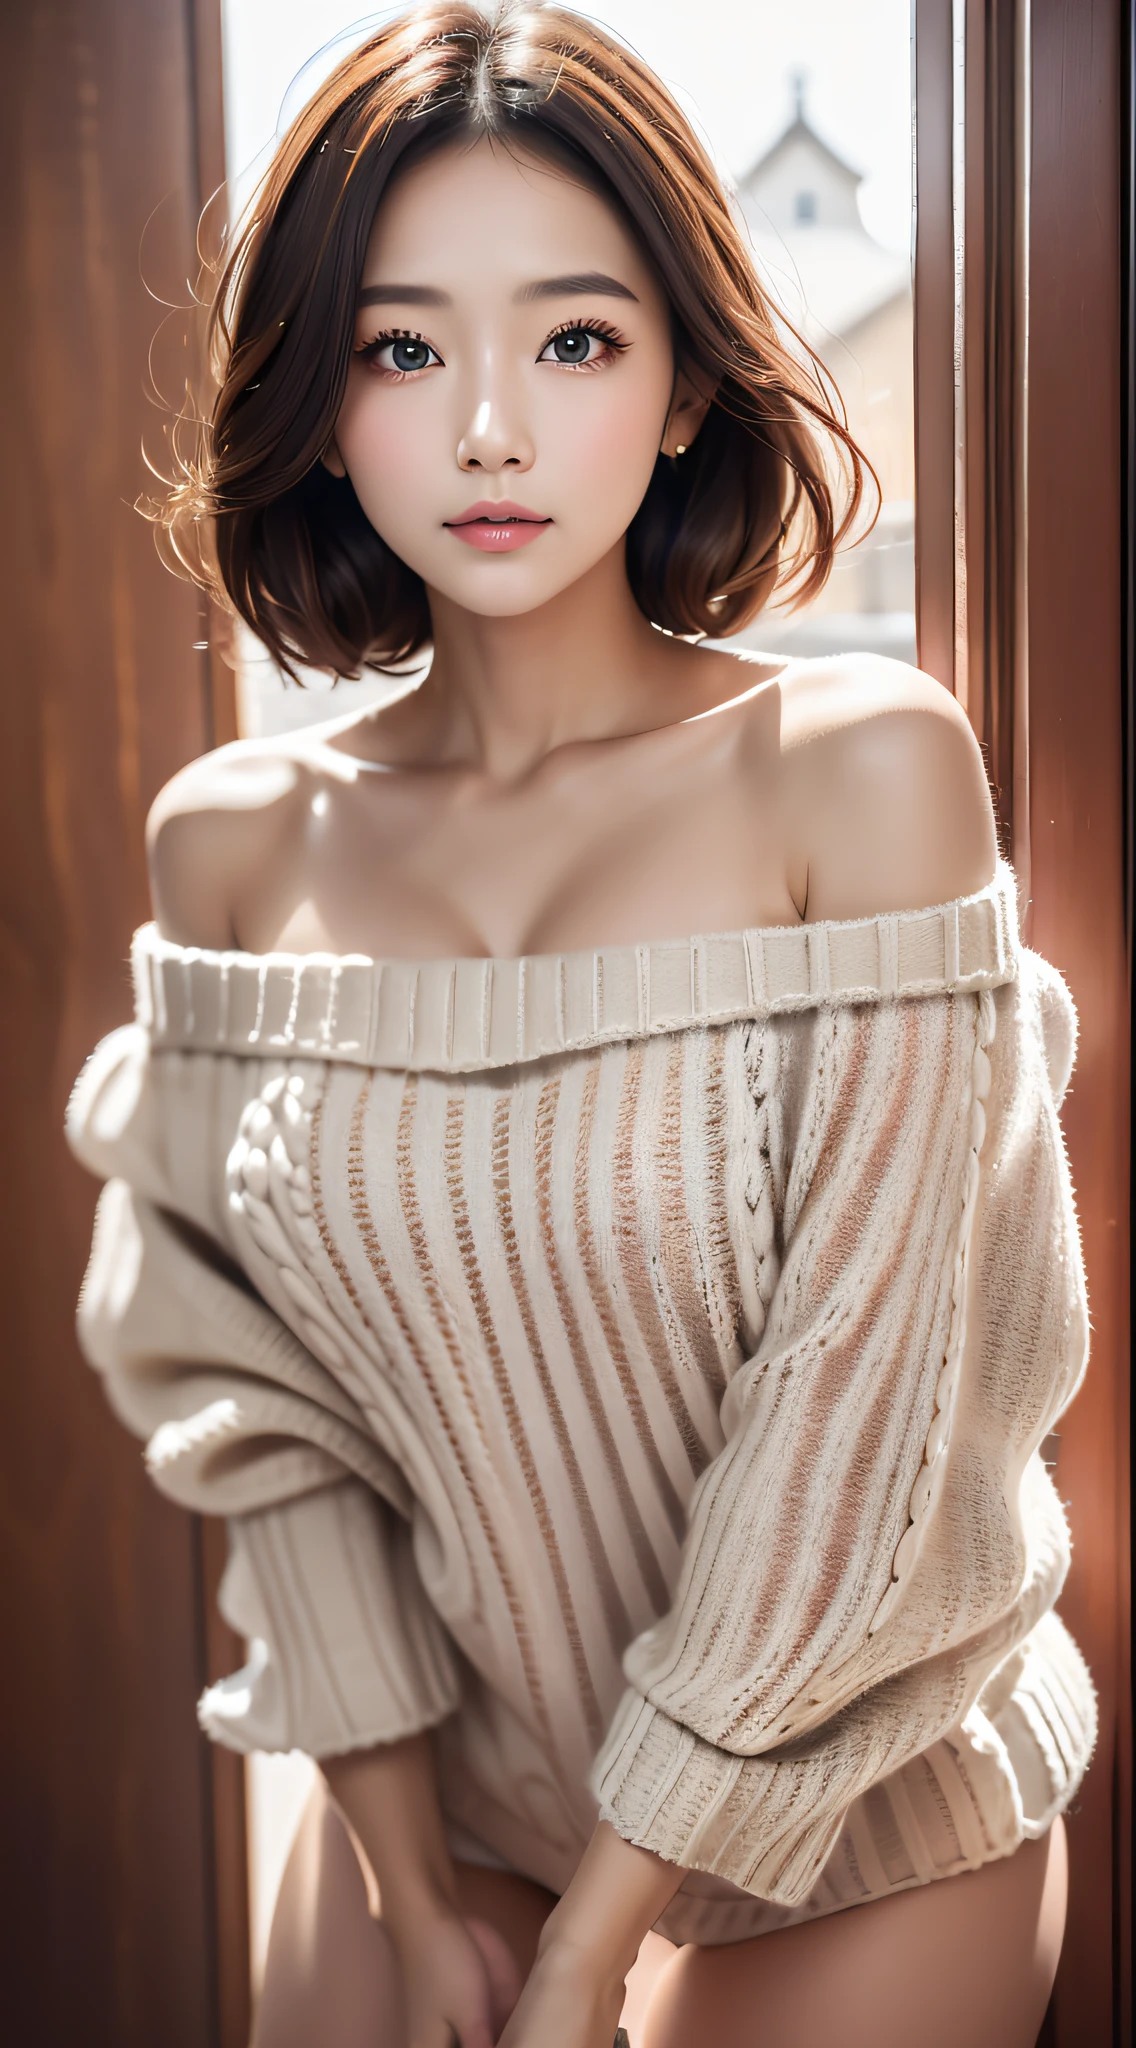 (beautiful face of young girl, Highly detailed), (realisitic,８K)、Single Female、28 year old、 (extremely detailed CG unified 8k wallpaper),  Professional Photography, Realistic Photos, (off-the-shoulder sweater:1.8), (cleavage:1.5),（large boob）、（Futomo）、 (Christmas, Christmas Ornaments, Christmas tree),  (Sheer lace panties:1.3),  Beautiful sunset, depth of fields, (View from below:1.3),Looking at the camera、Light reflected in the eyes